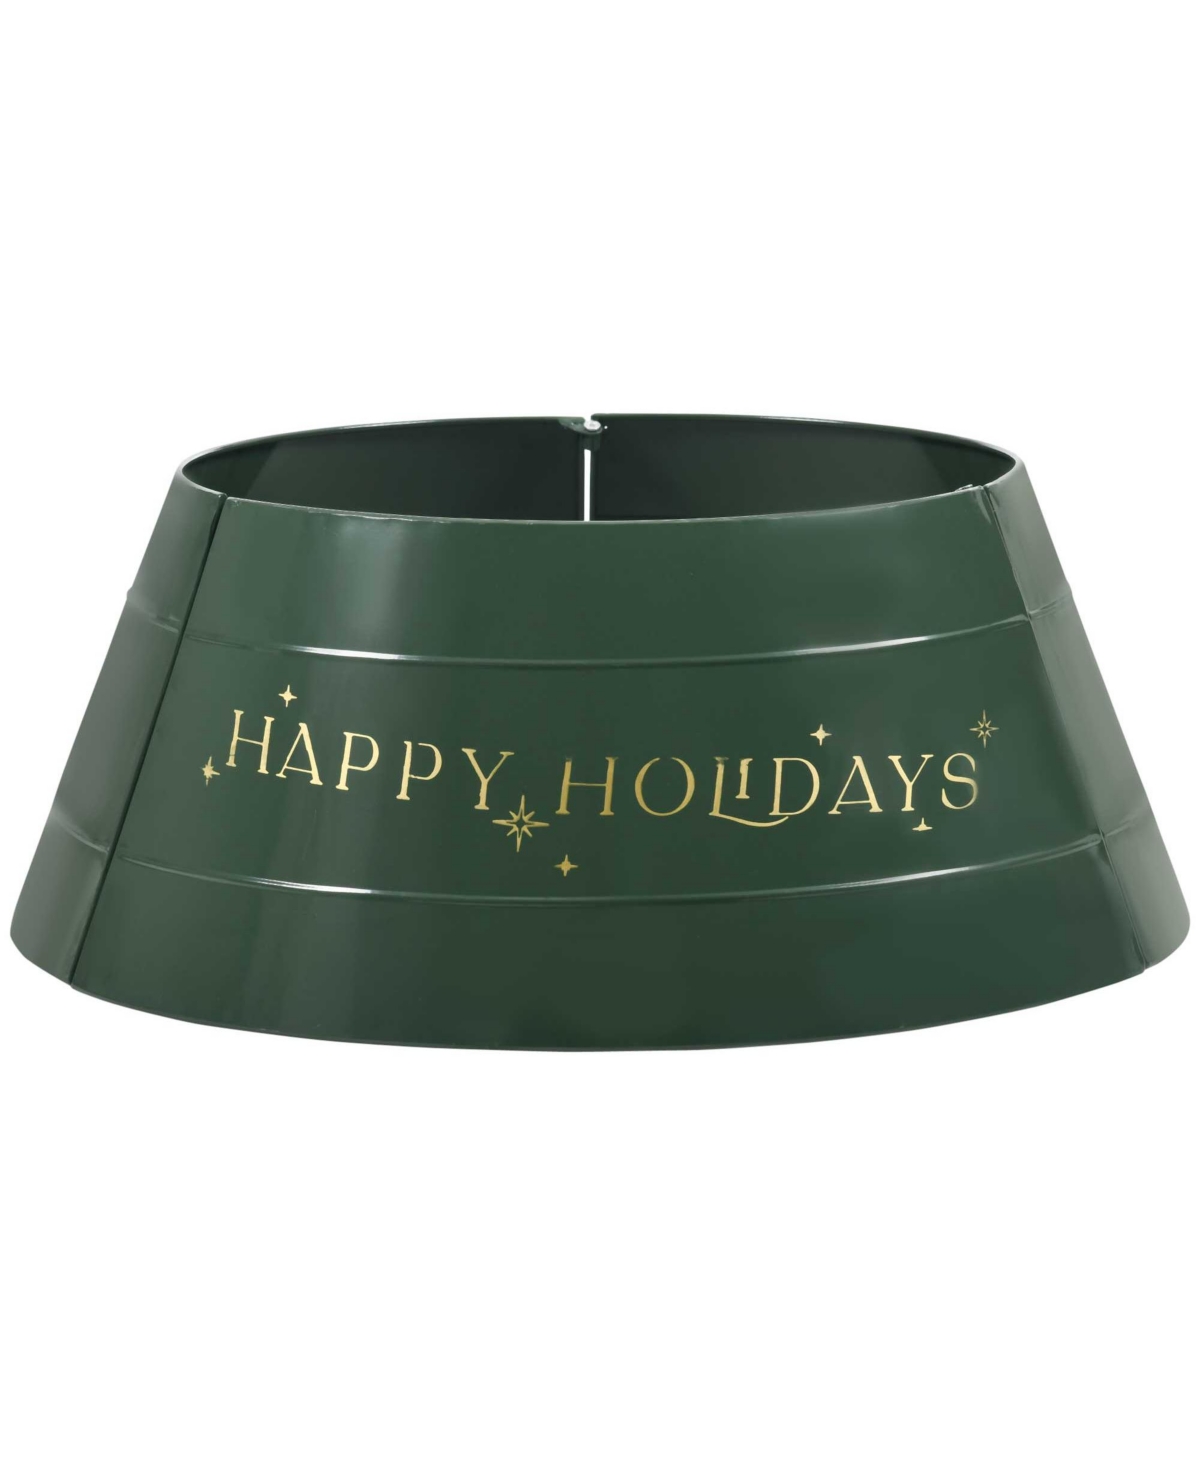 26 Inch Christmas Tree Collar Ring, Stand Cover for Decor, Green - Green